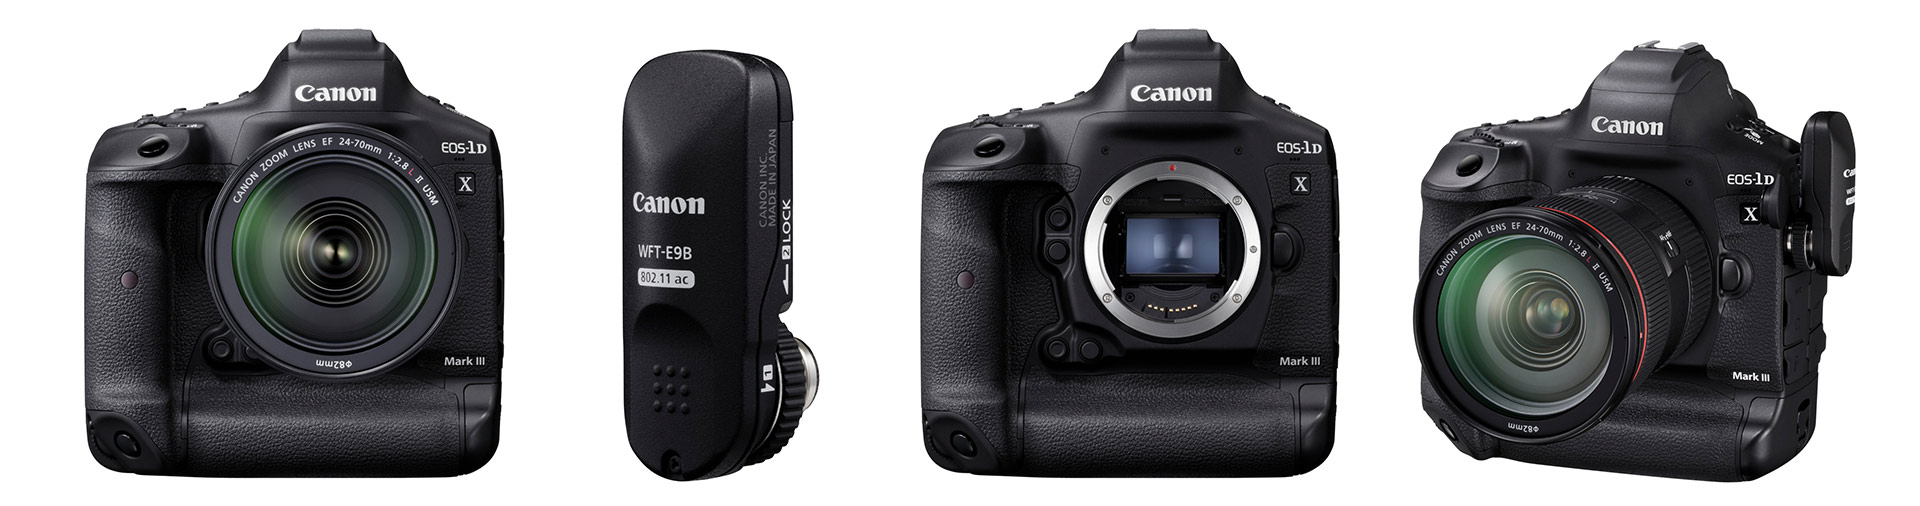 incoming-Canon-1dxiii-has-been-announced